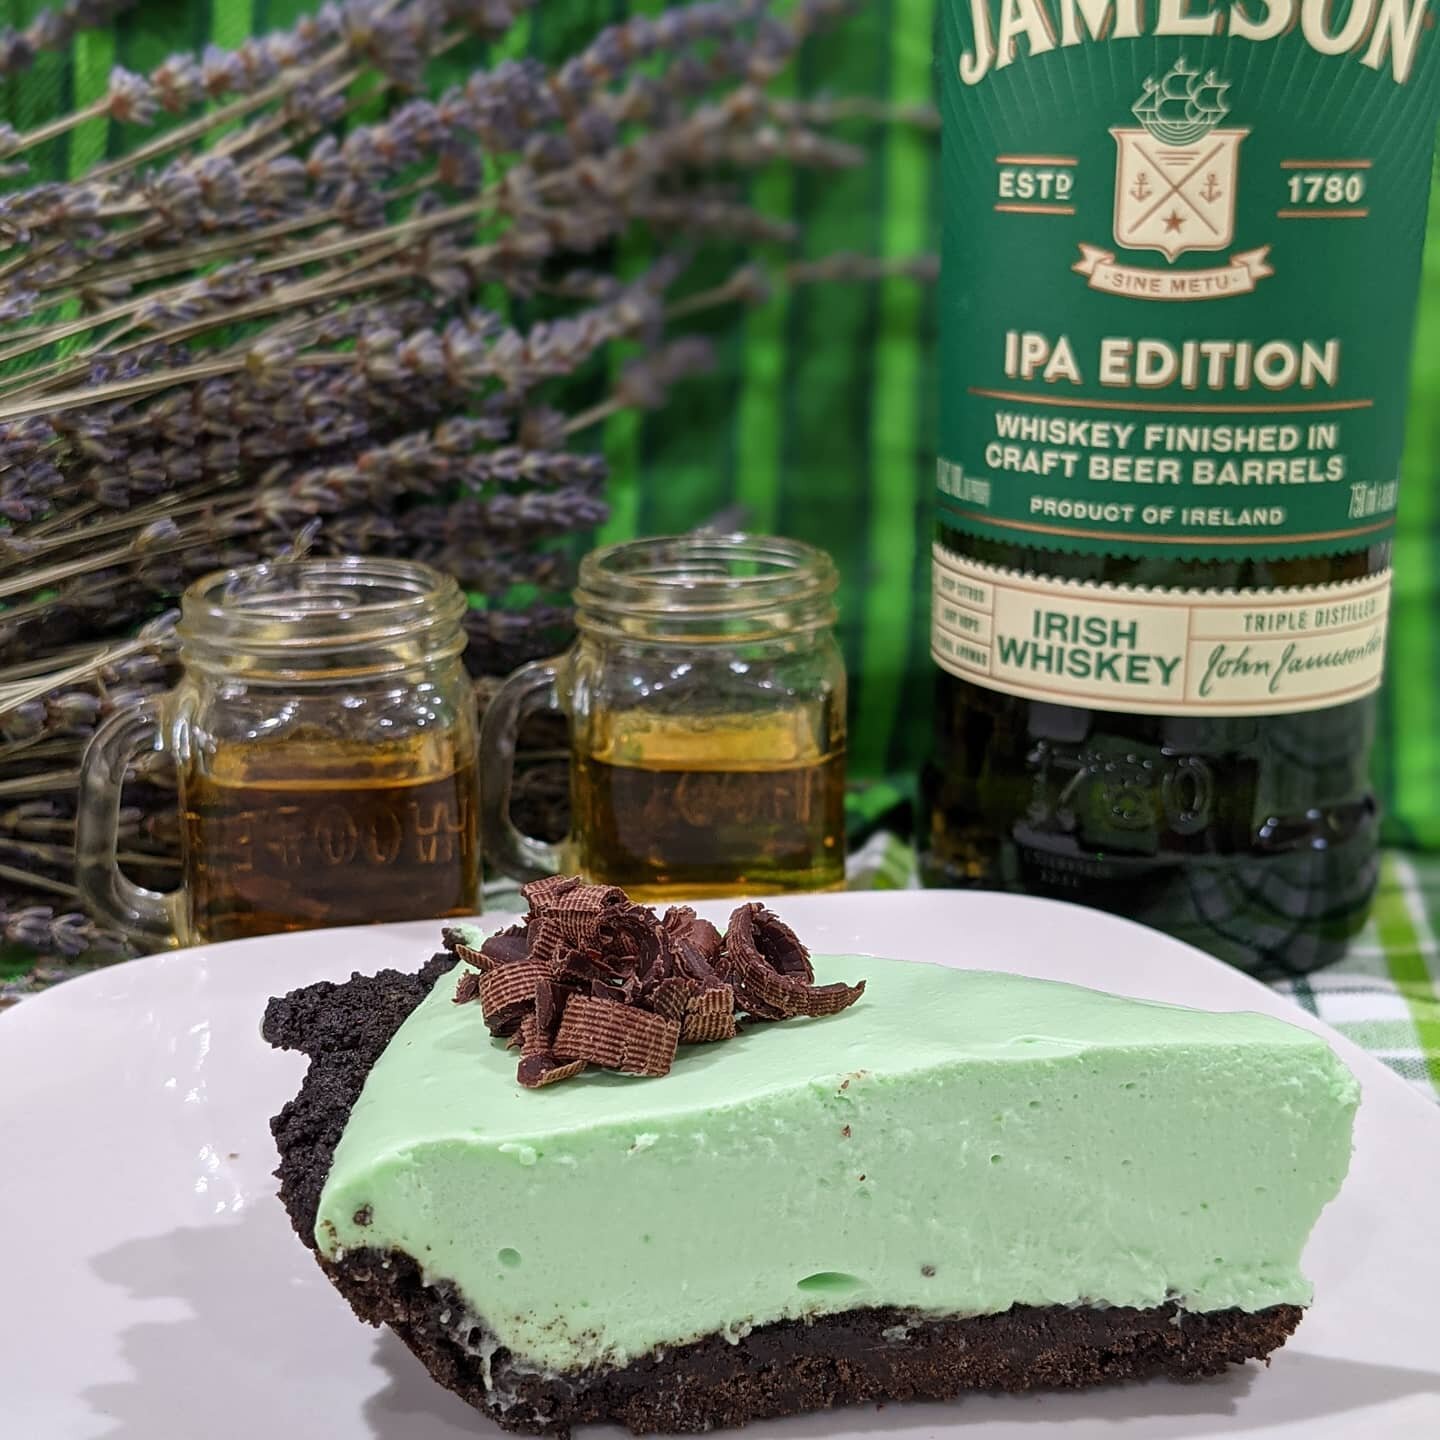 🍀Happy St. Patrick's Day!!!!!!
:
Grasshopper Pie w/a mint oreo crust and flavors of Cr&eacute;me de Menthe and Cr&eacute;me de Cocao.
:
$30
Made to Order
:
#thepiewitch #stpatricksday #stpattysday #green #greenpie #grasshopperpie #pie #piesofinstagr